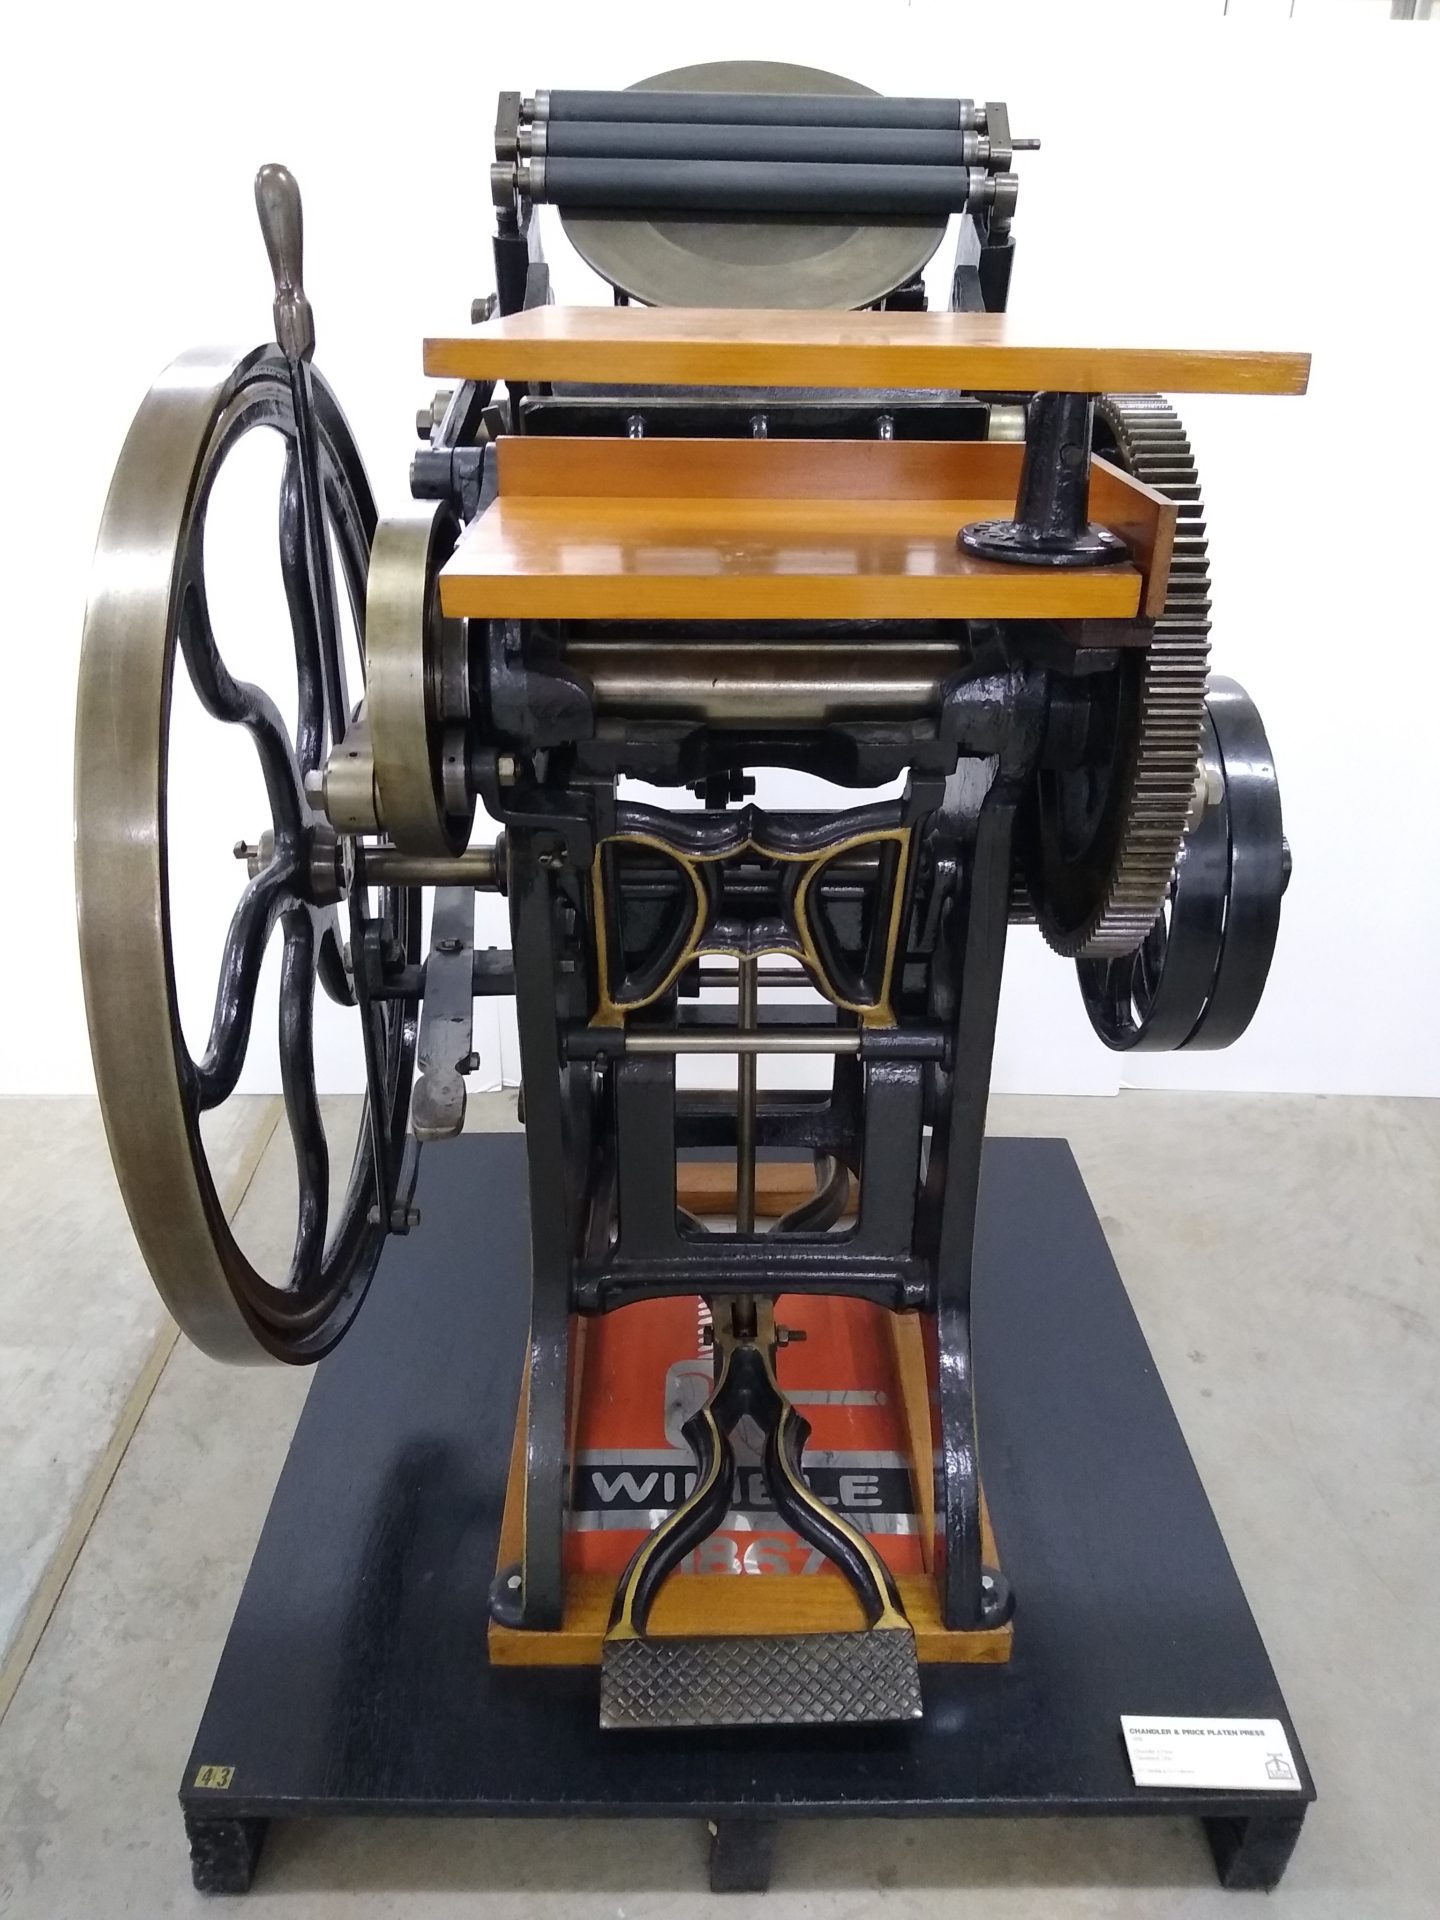 Cast iron printing press with ornate flywheel, treadle, and timber feed boards